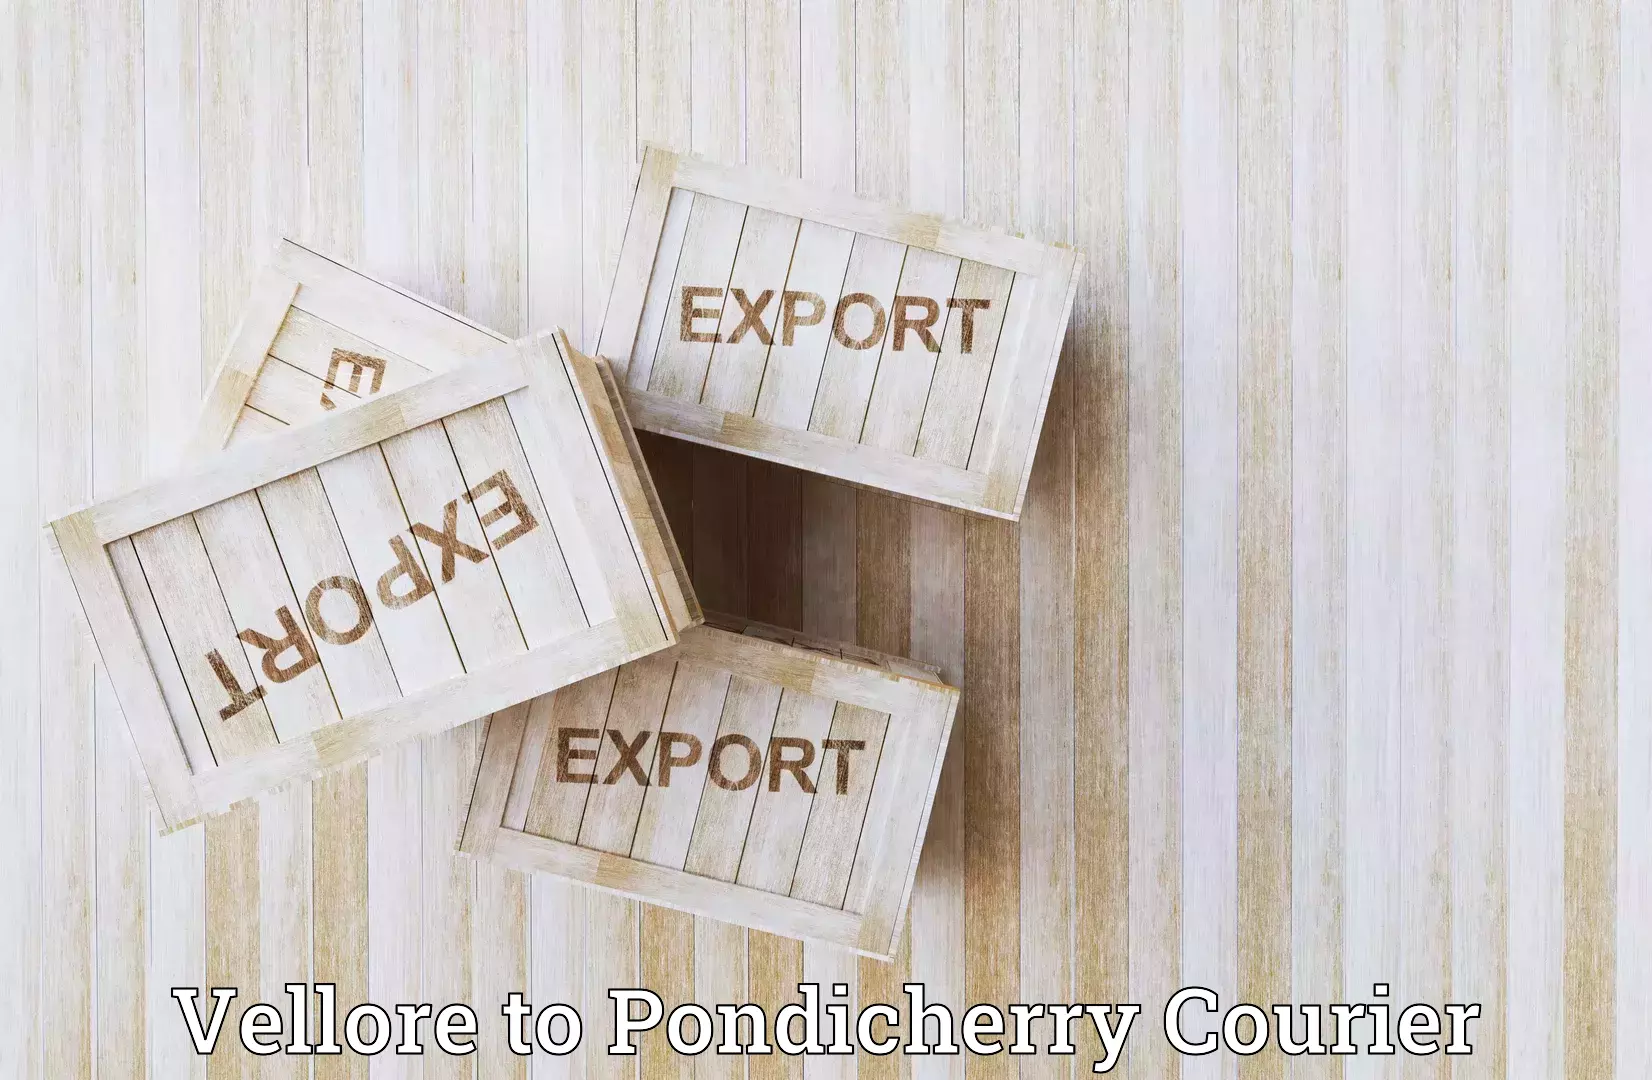 Full-service courier options Vellore to Pondicherry